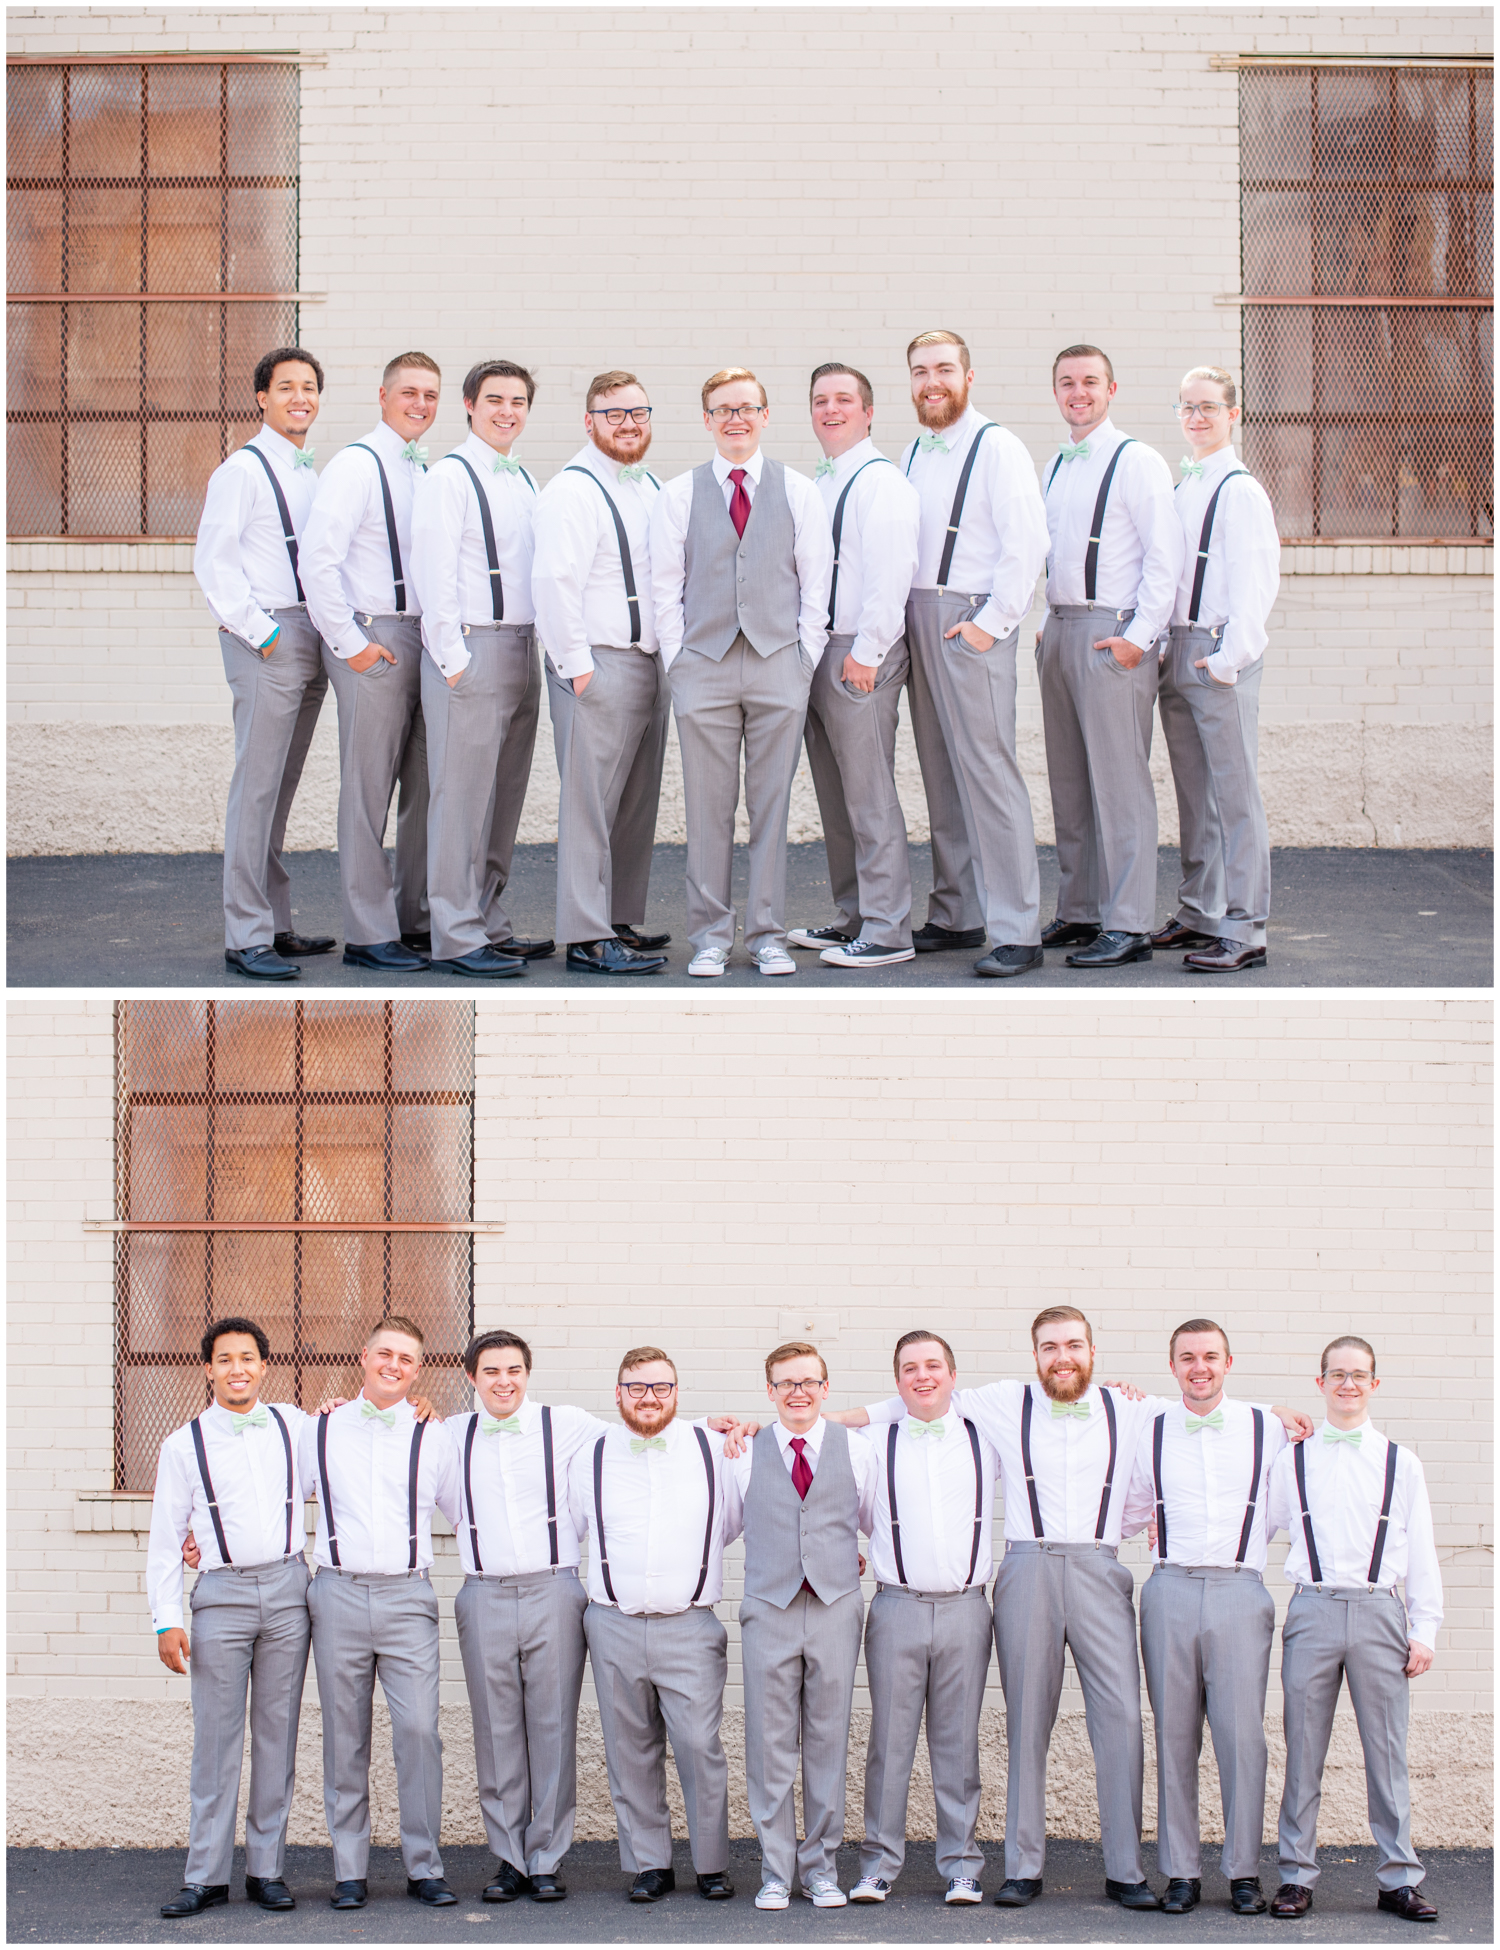 Summer Wedding in Greeley at Glenmere Park and The Armory | Britni Girard Photography - Wedding Photographer